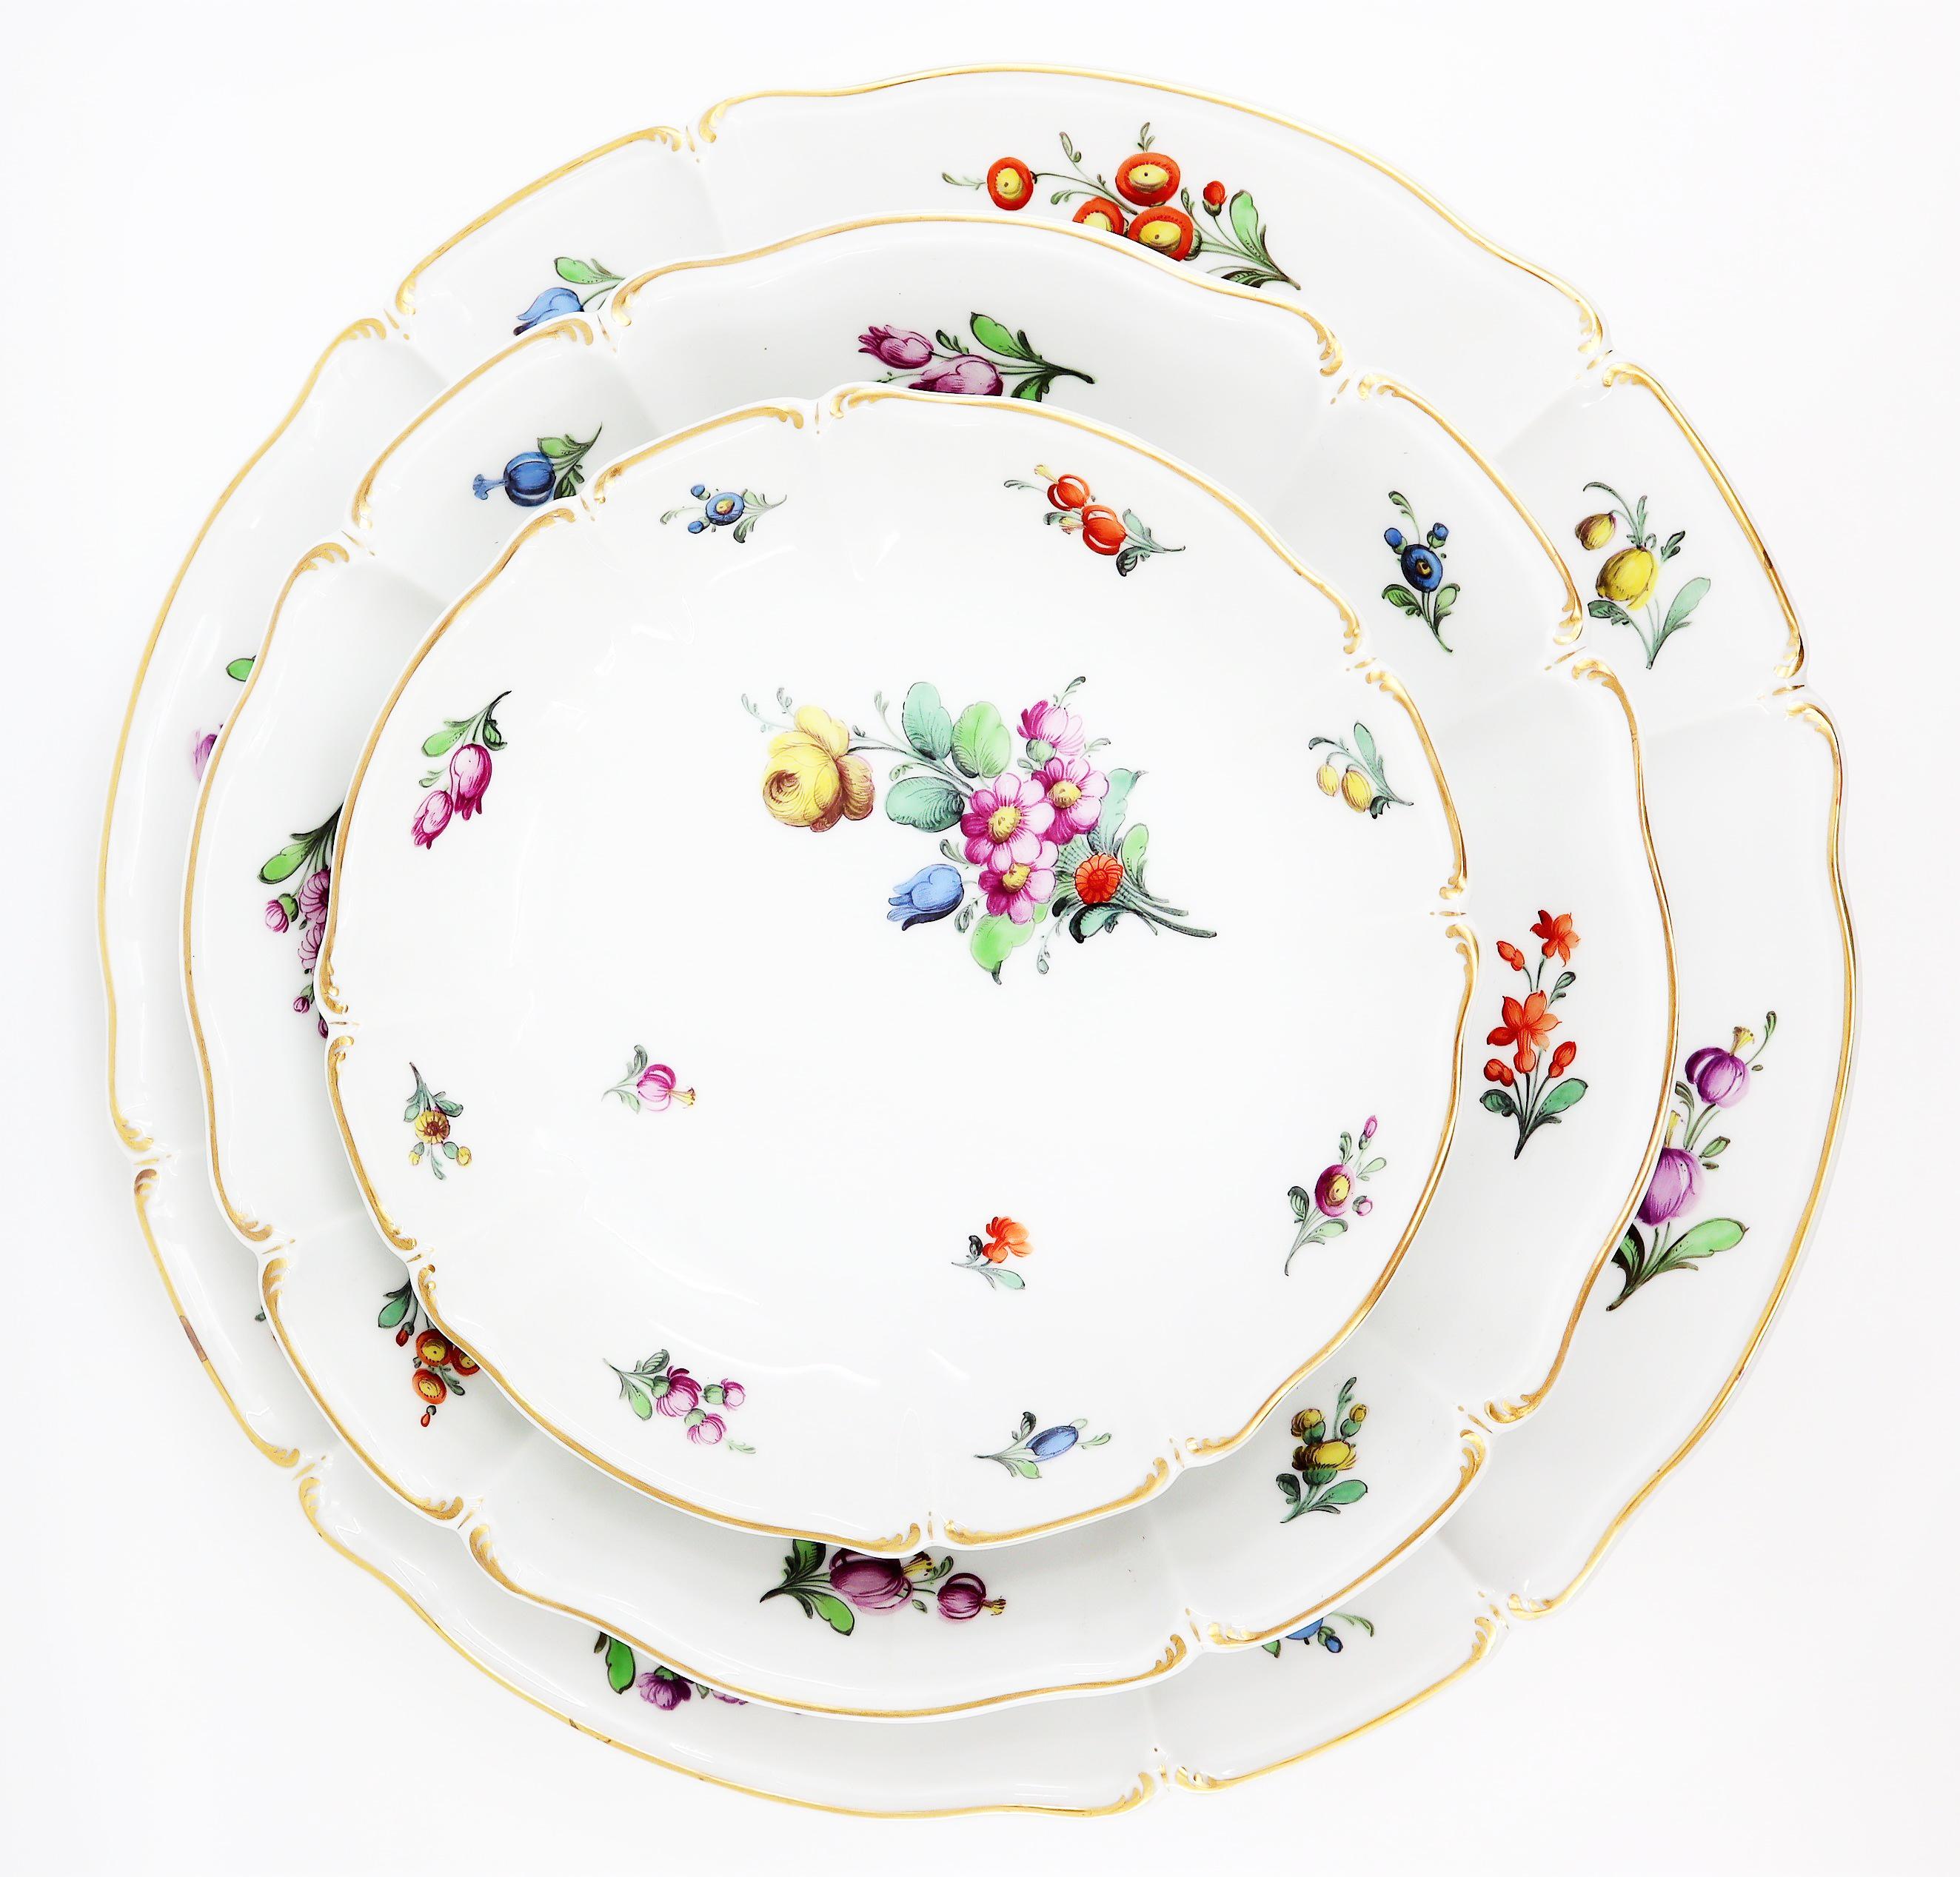 Hand-Painted Dinner Service, 19th Century Porcelain, German, Hand Painted with Flowers Décor